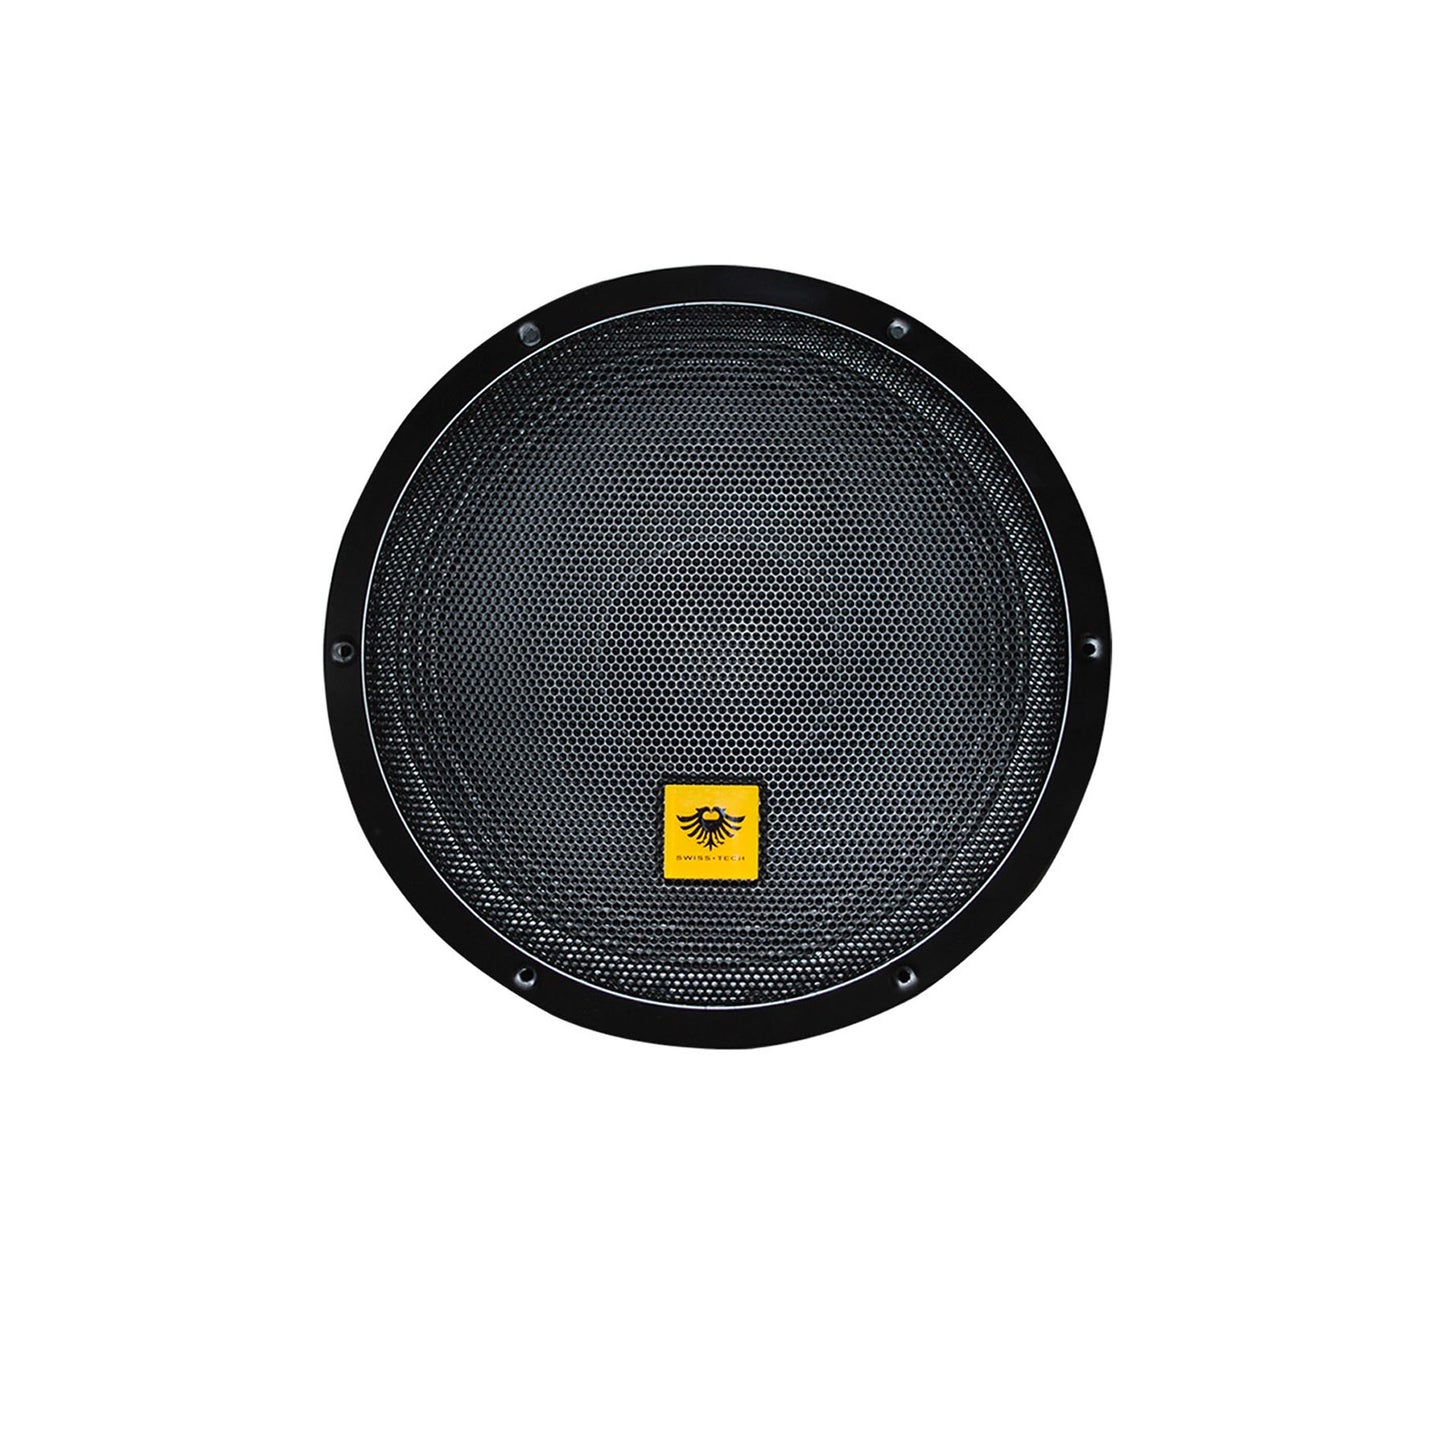 KEVLER GT-15W 500W 15" Base Speaker Driver with 45Hz-7KHz Frequency Response, 98dB Sensitivity Level and 8 Ohms Impedance